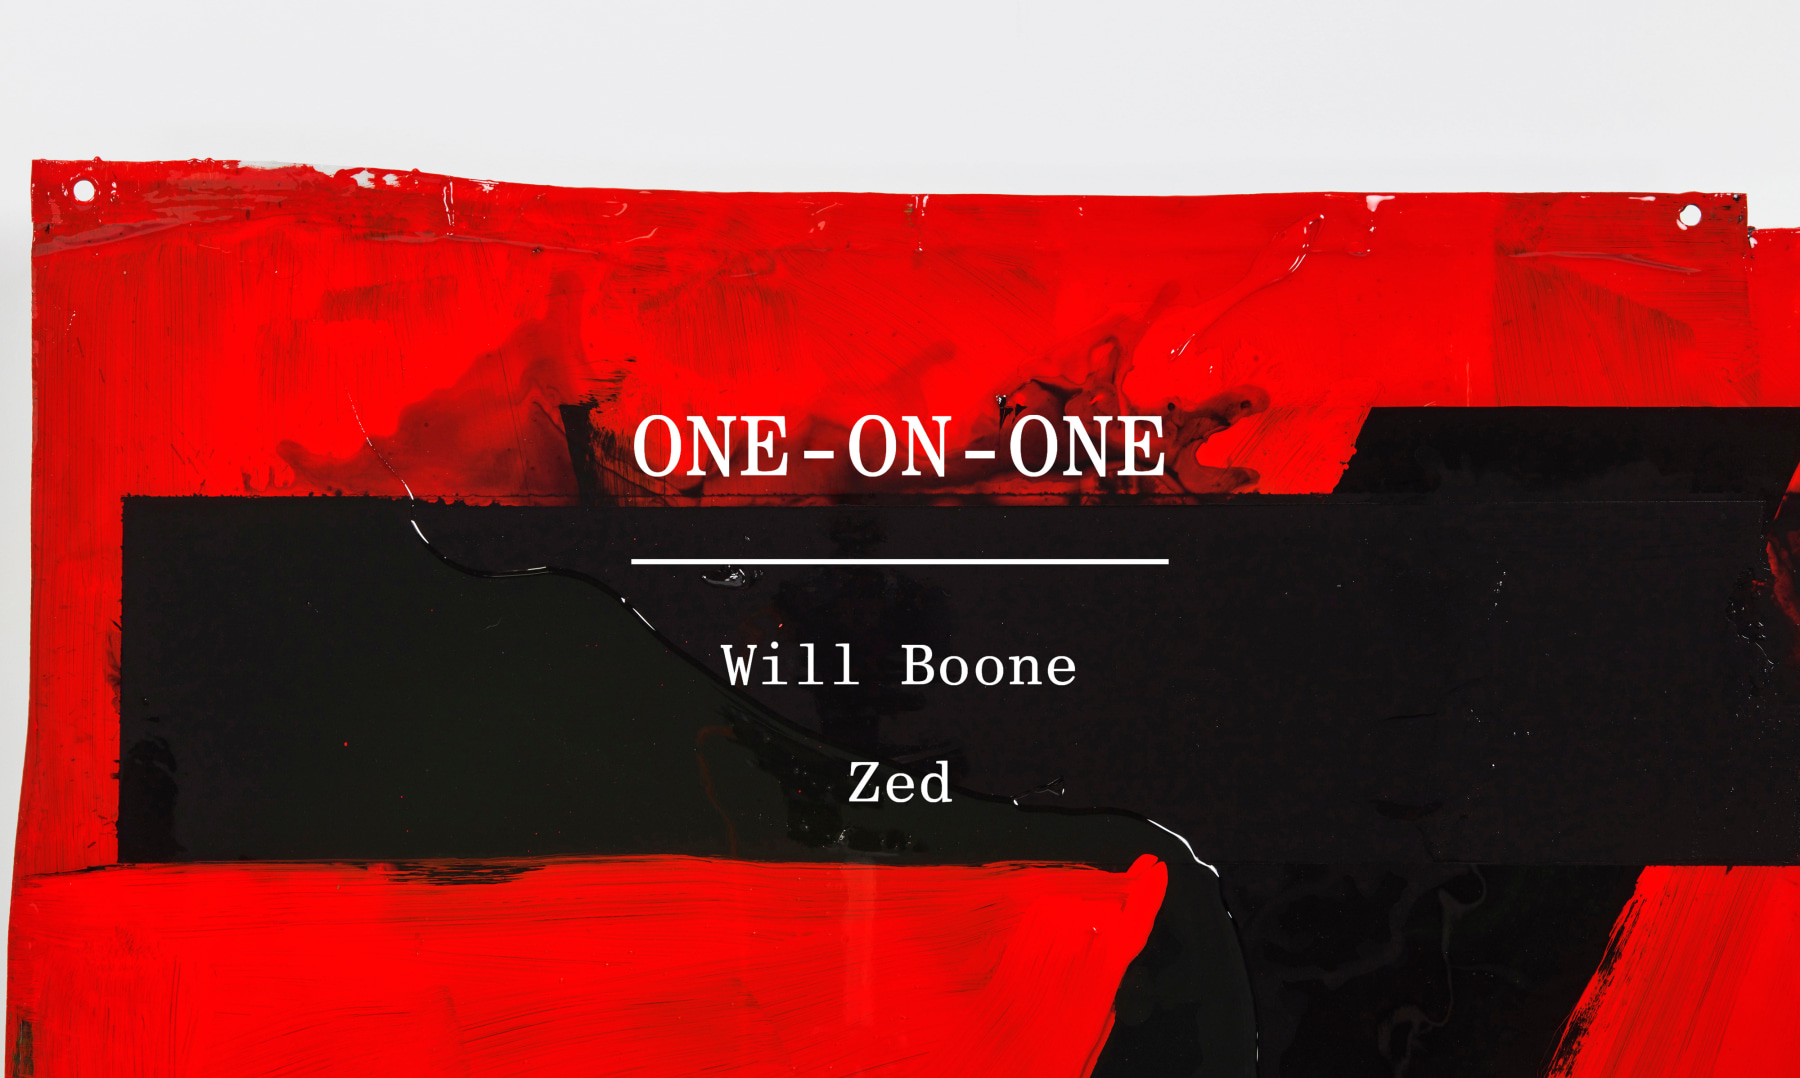 One-on-One: Will Boone - Zed - Viewing Room - David Kordansky Gallery